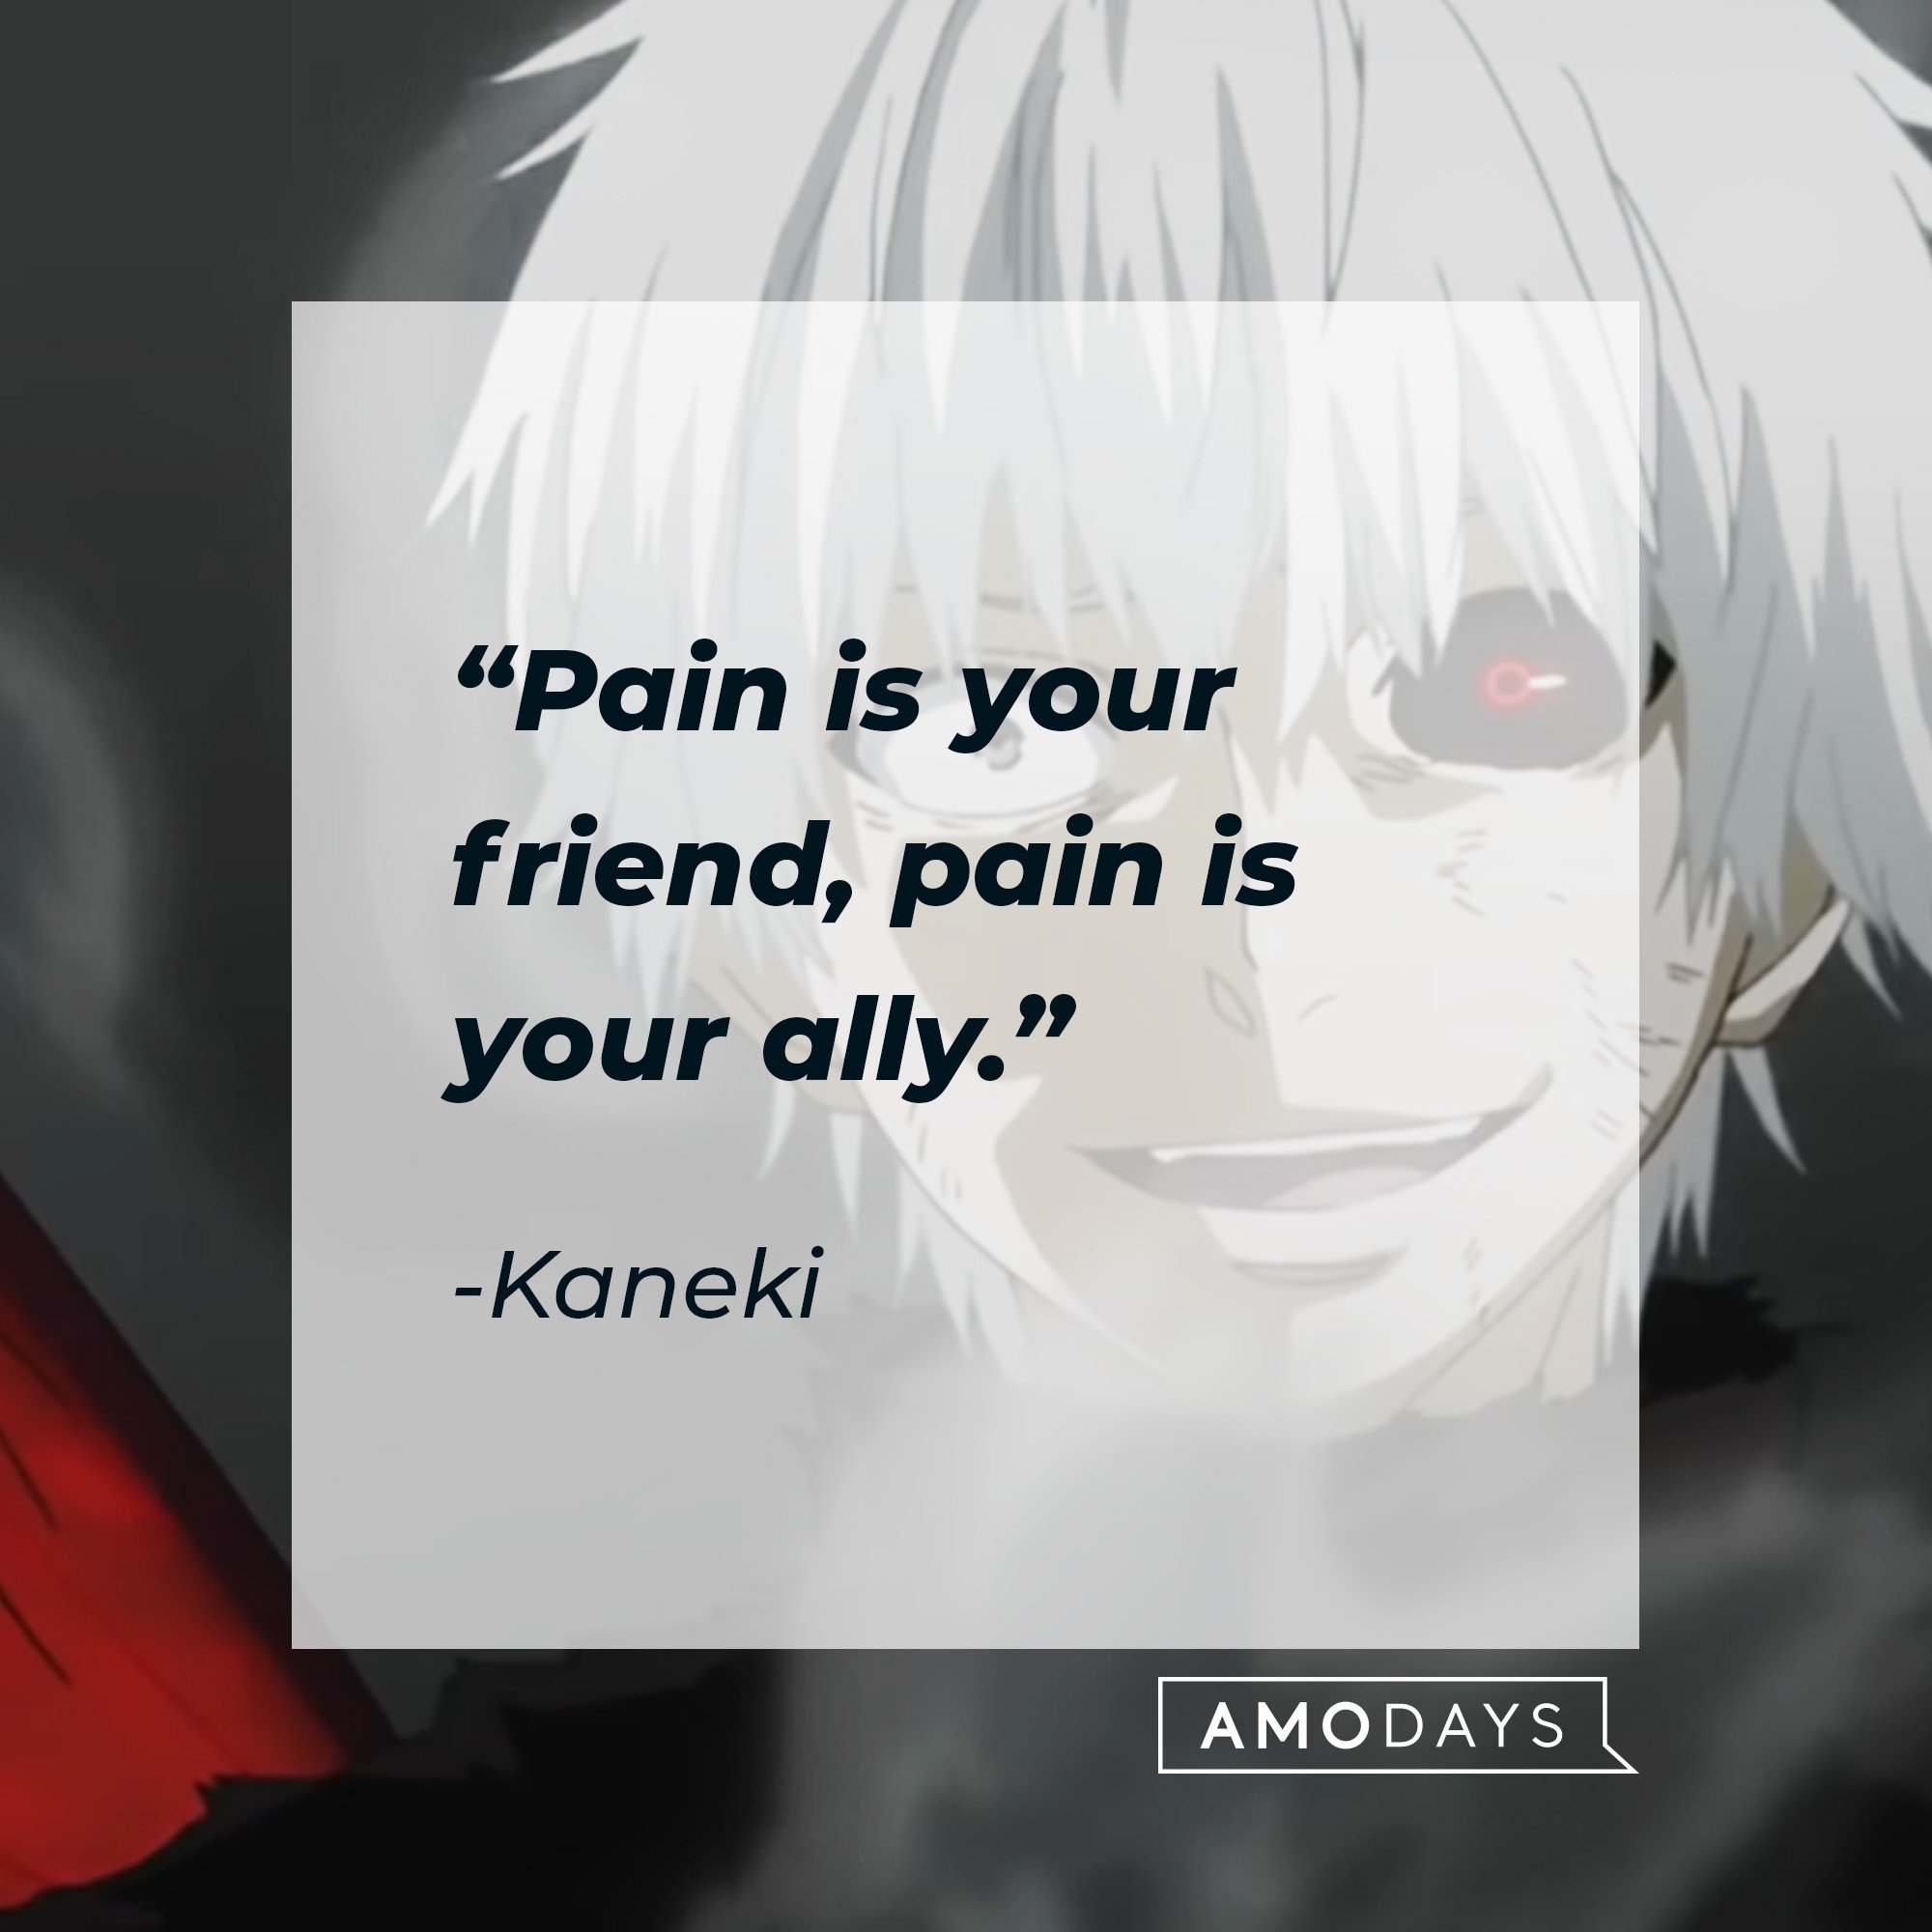 Kaneki's quote: "Pain is your friend, pain is your ally." | Image: AmoDays